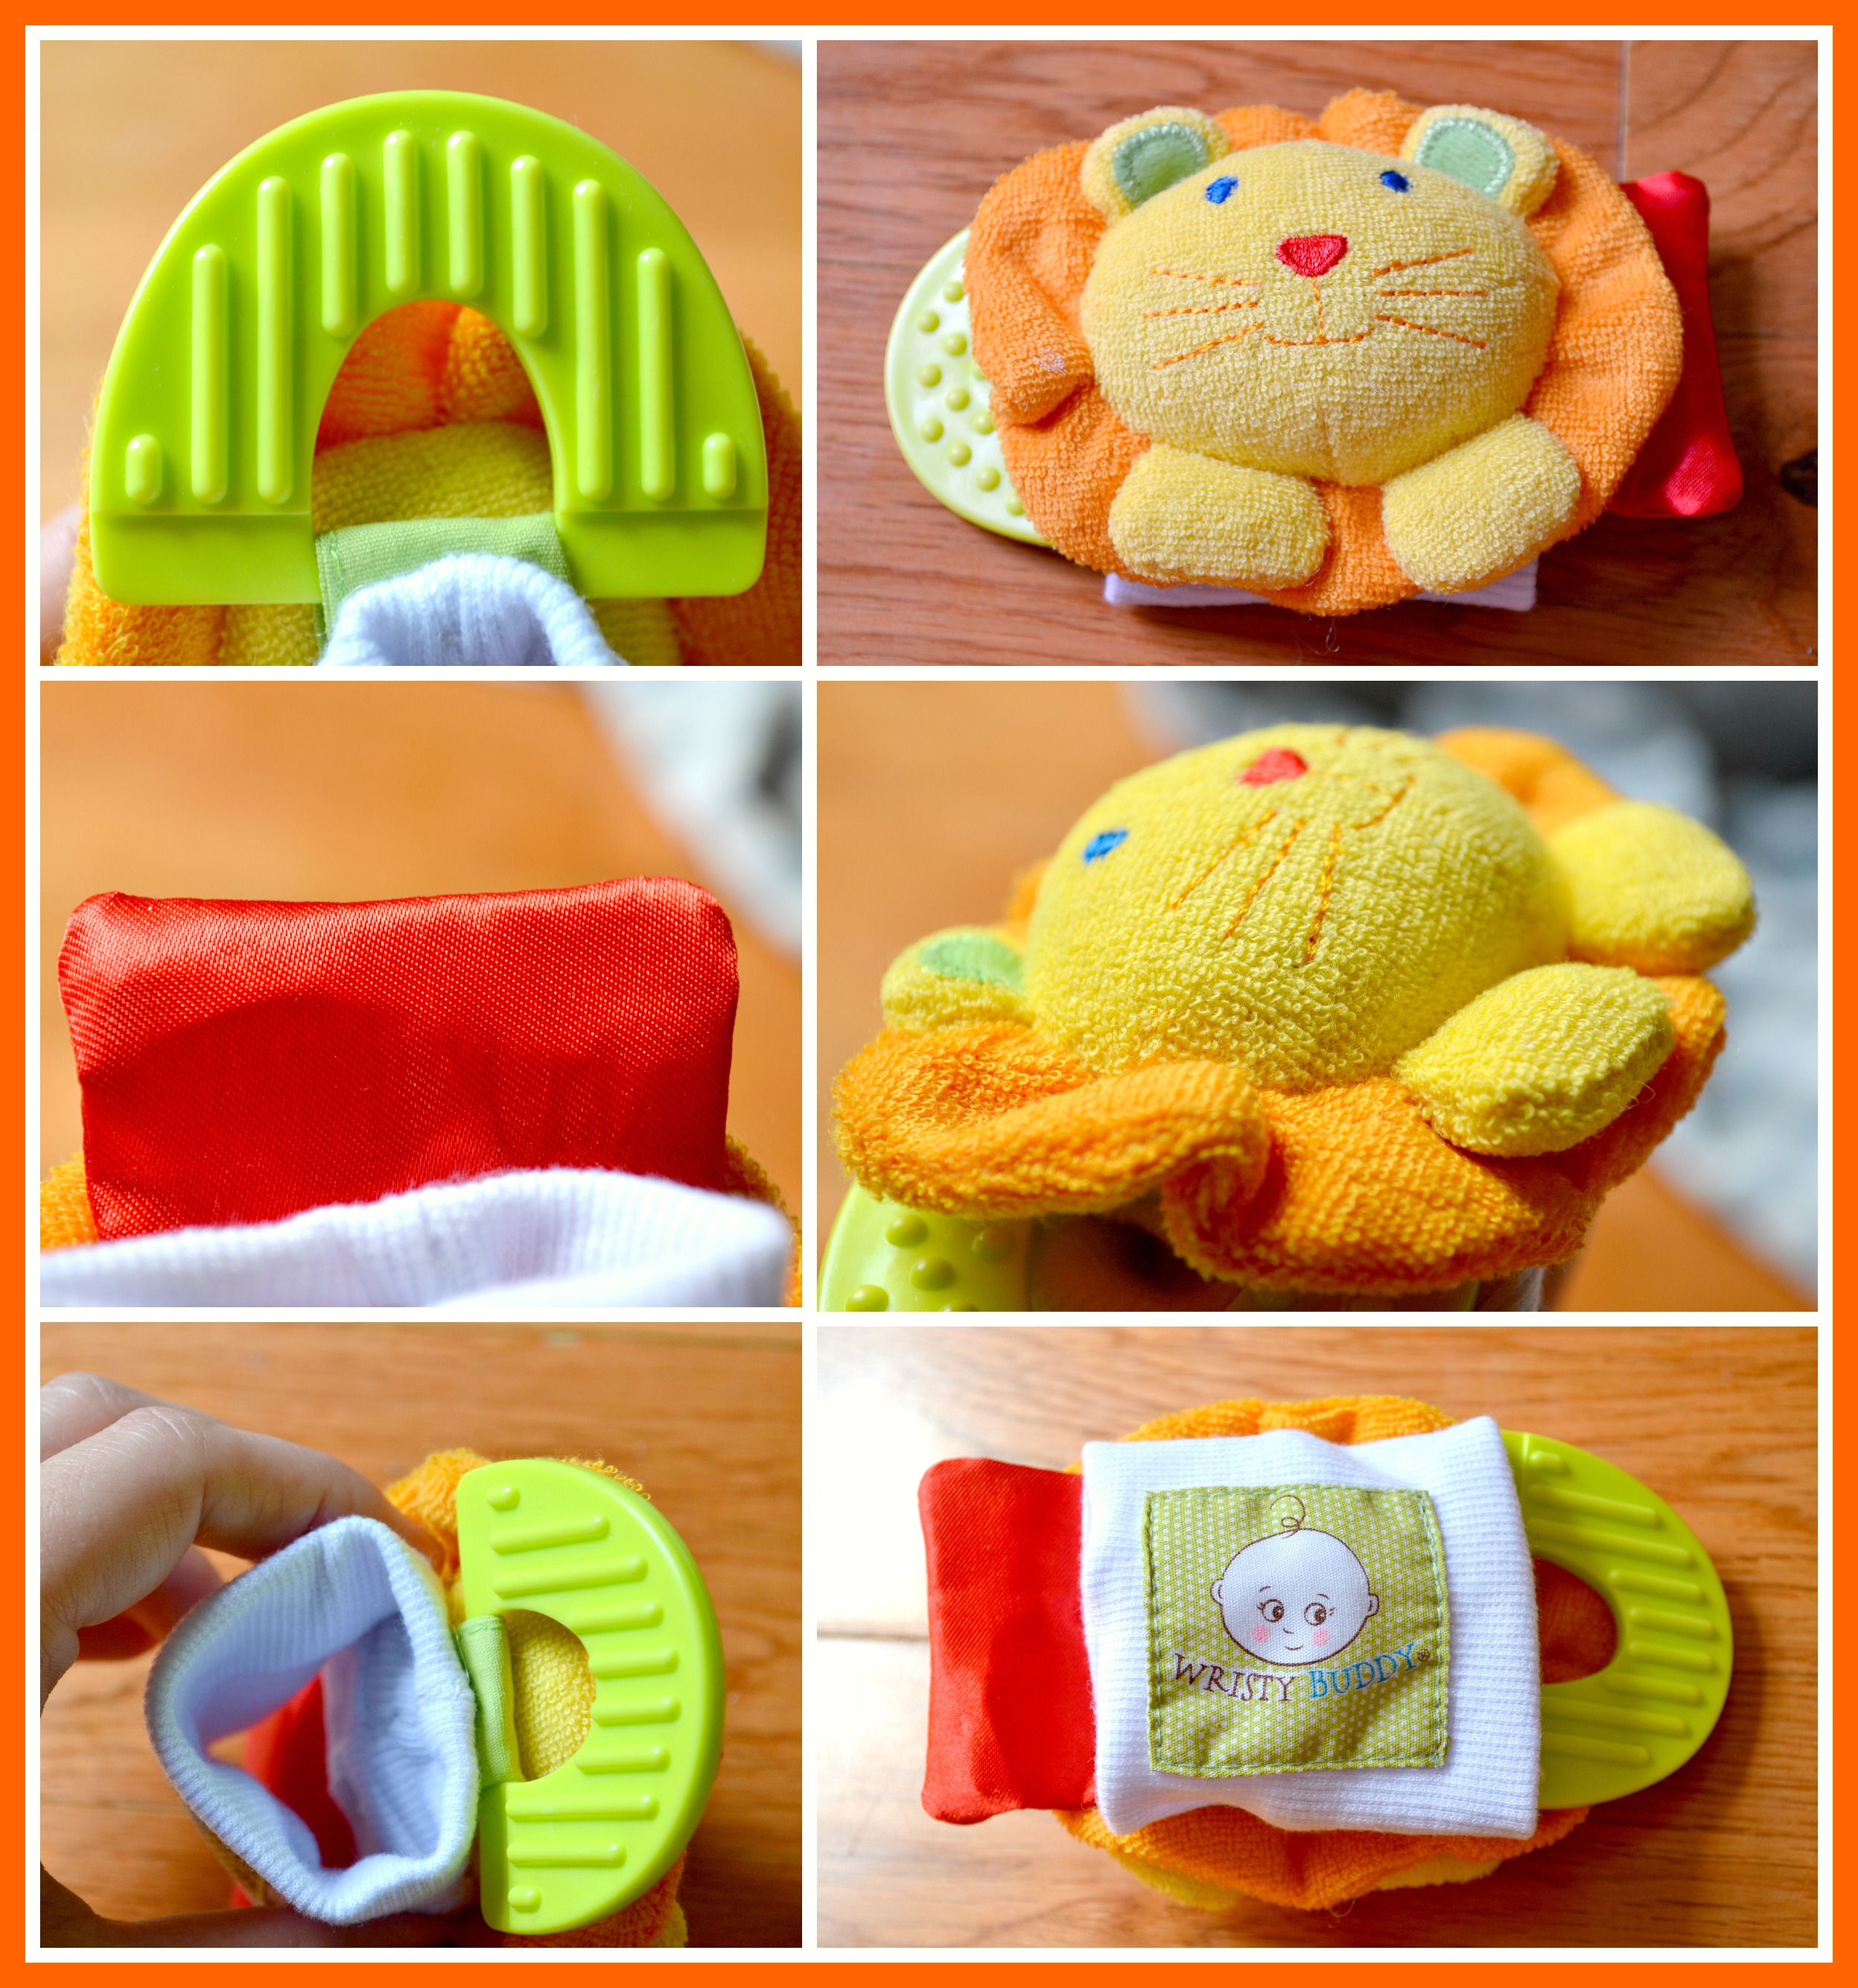 Lion Wristy Buddy Review (Getting Ready For Baby Gift Guide)